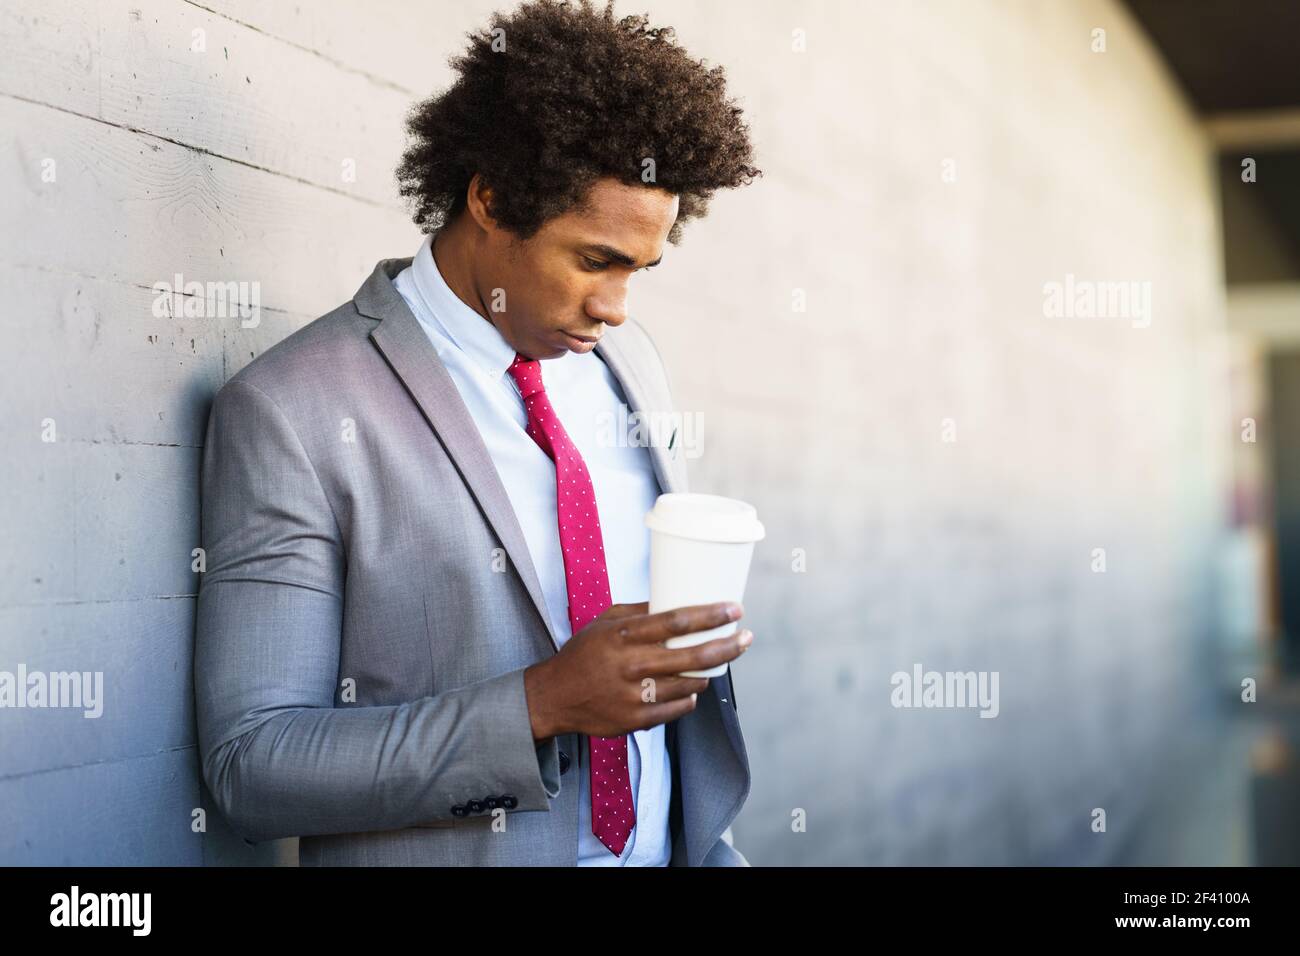 Worried Black Businessman taking a coffee break with a take-away glass. Man with afro hair.. Worried Black Businessman taking a coffee break outdoors Stock Photo